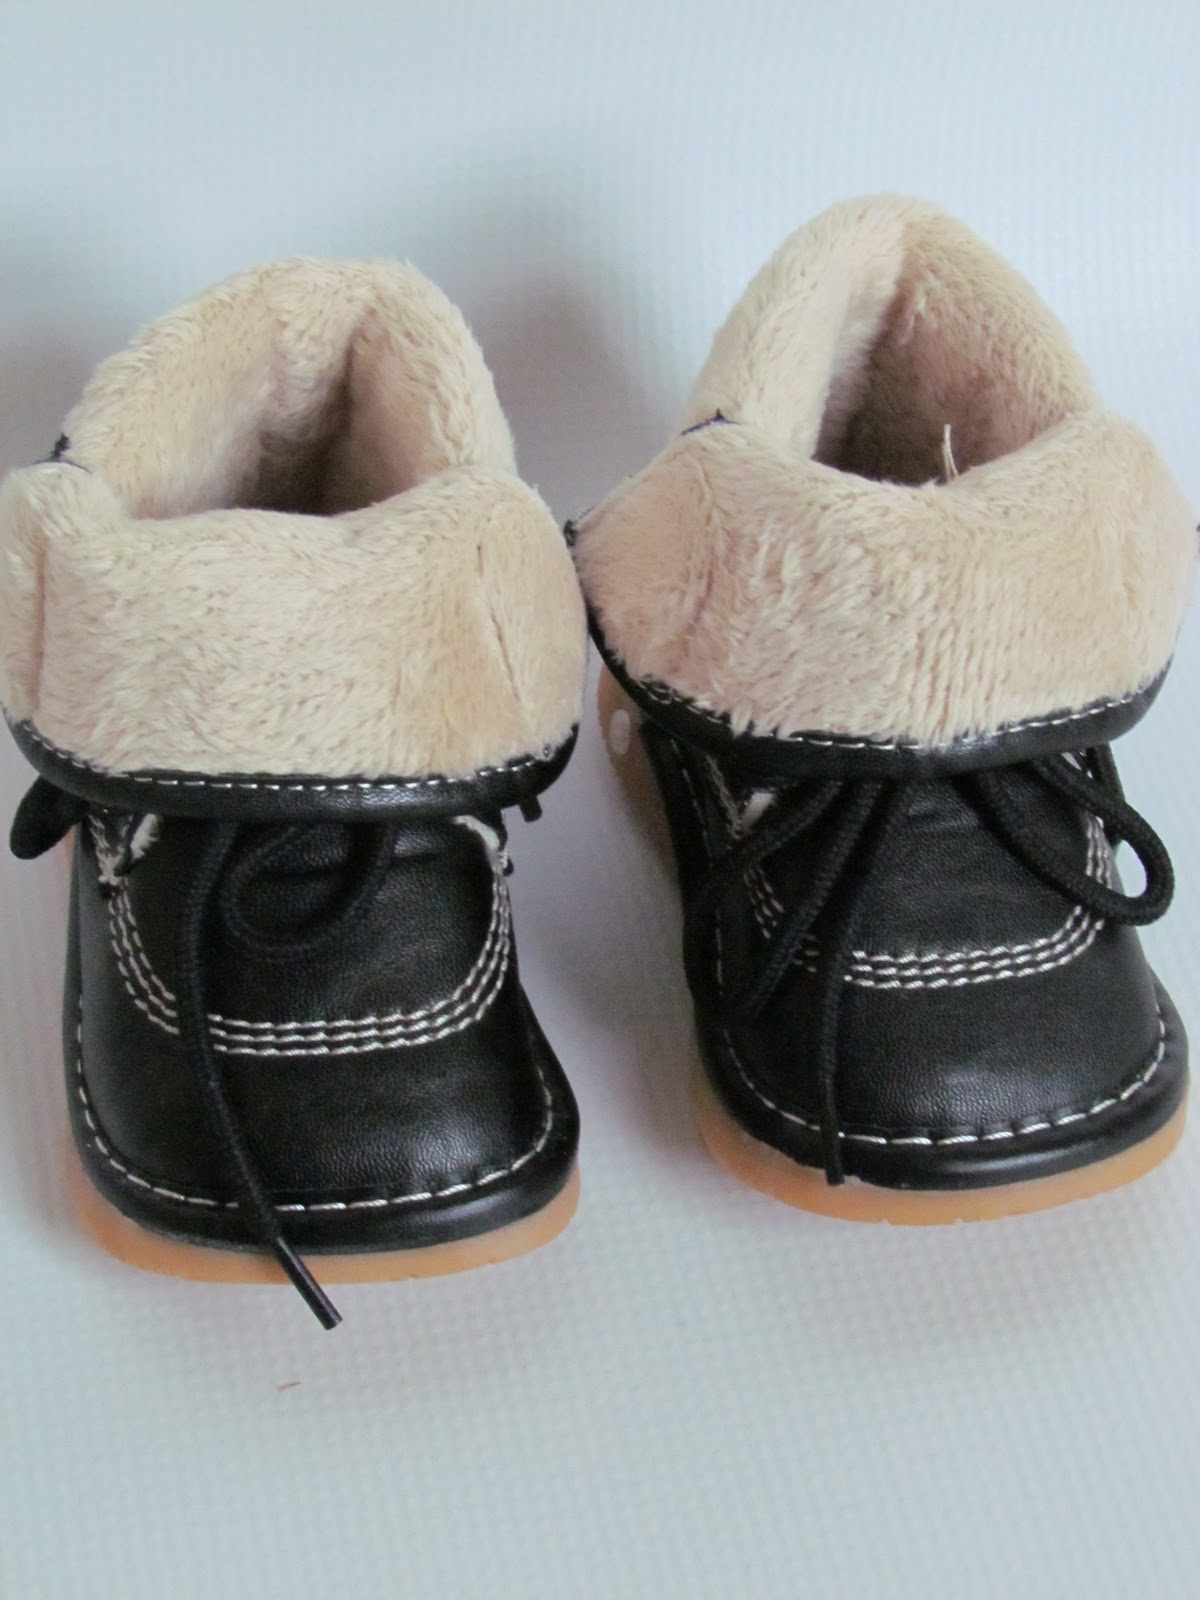 Squeaky Shoes for Tiny Tots: Squeaky Winter Boots